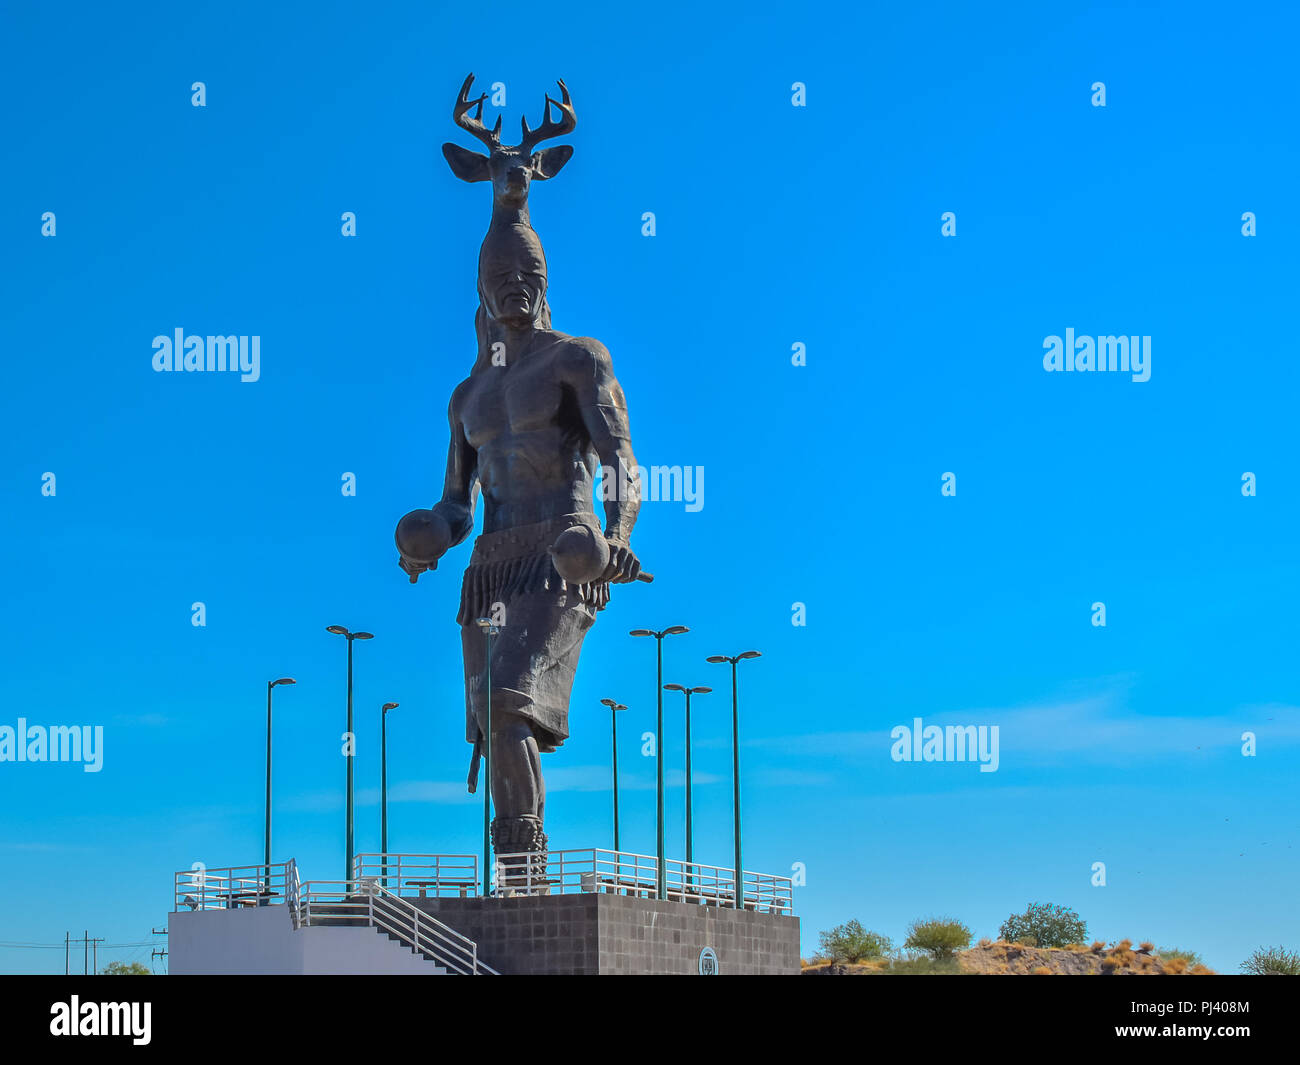 Ciudad Obregon, Mexico - Oct. 30, 2016: Giant Yaqui Indian statue. The Yaquis are an indigenous group in Mexico. Stock Photo